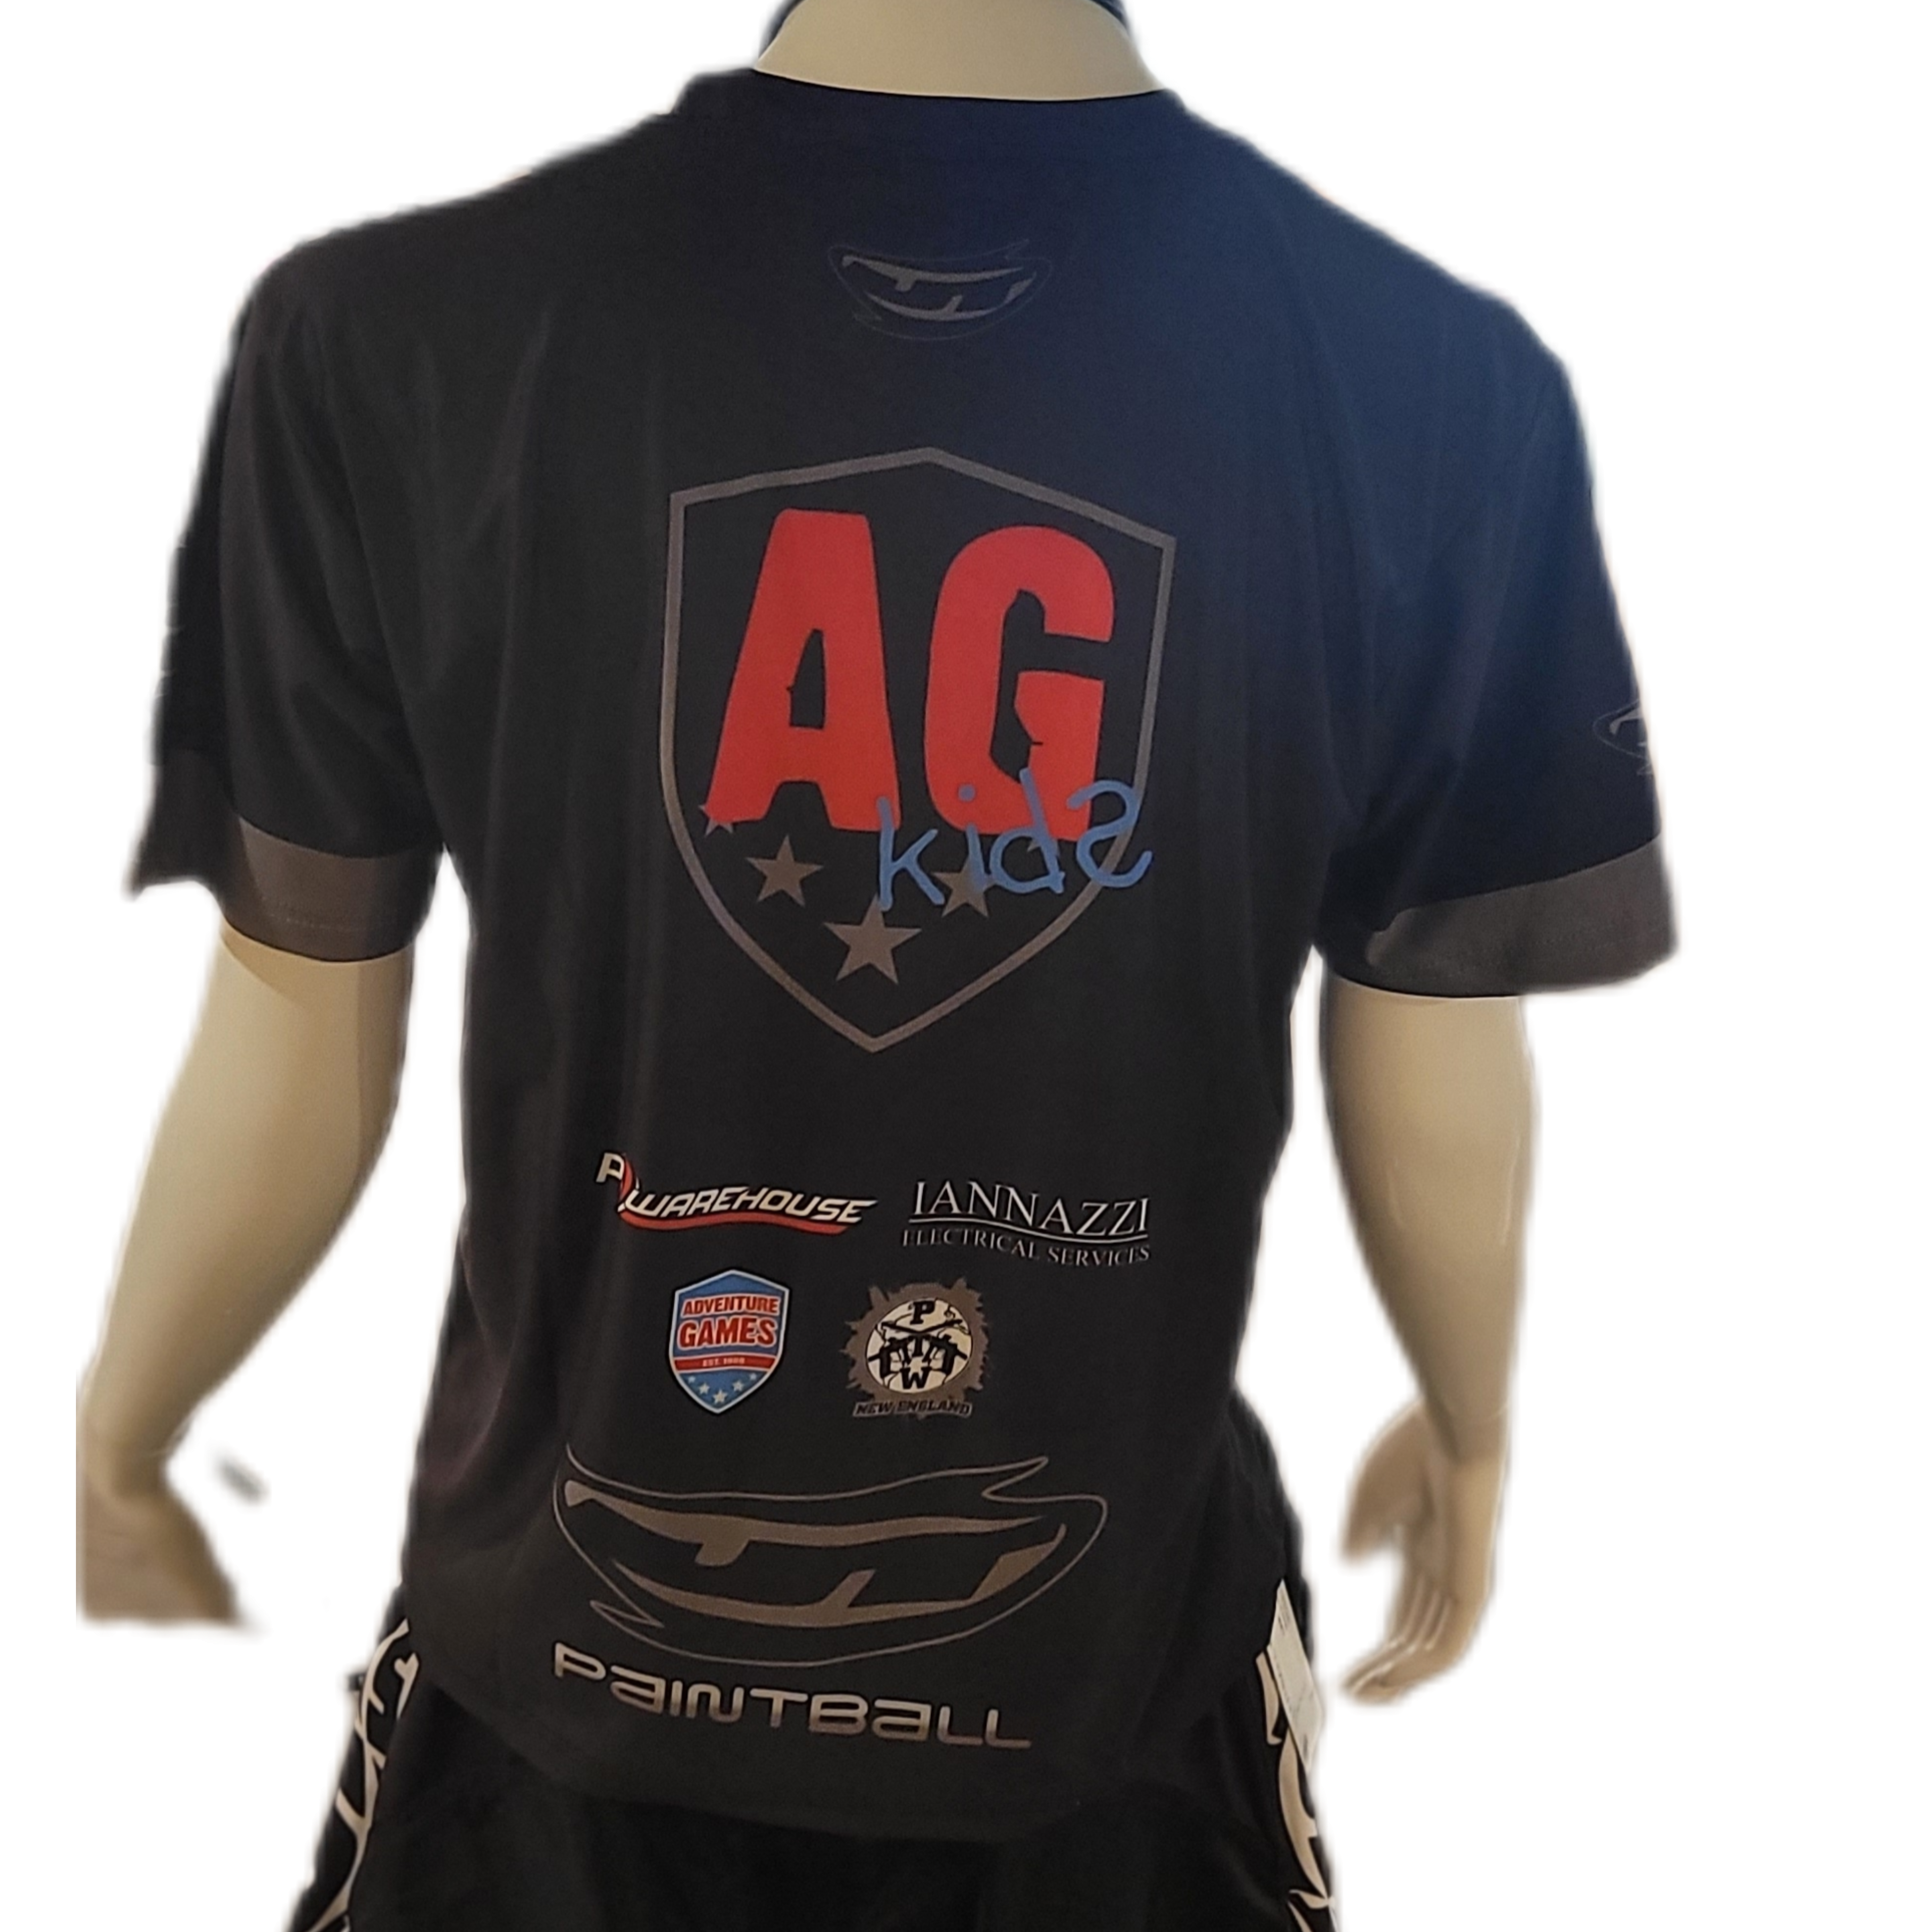 AG Kids Dry Fit